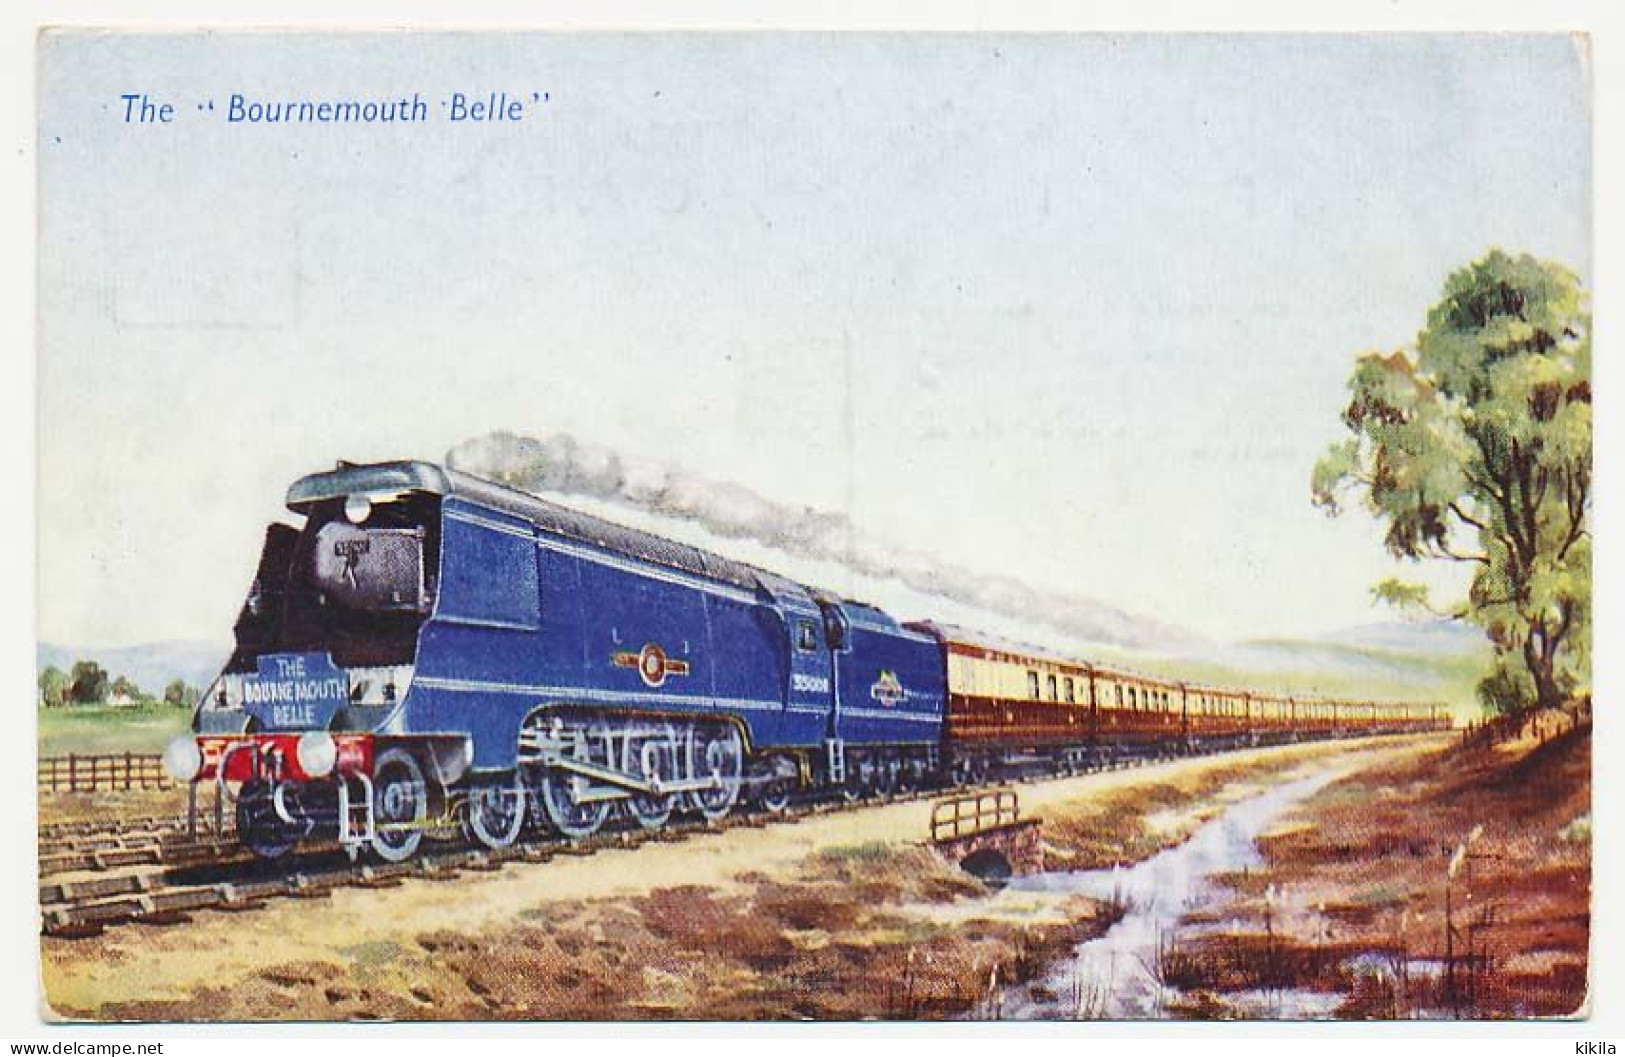 CPSM 9 X 14 Angleterre (262)  Train Locomotive The "Bournemouth Belle Hauled By Merchant Navy" Class 4.6.2 "Pacific" * - Treinen